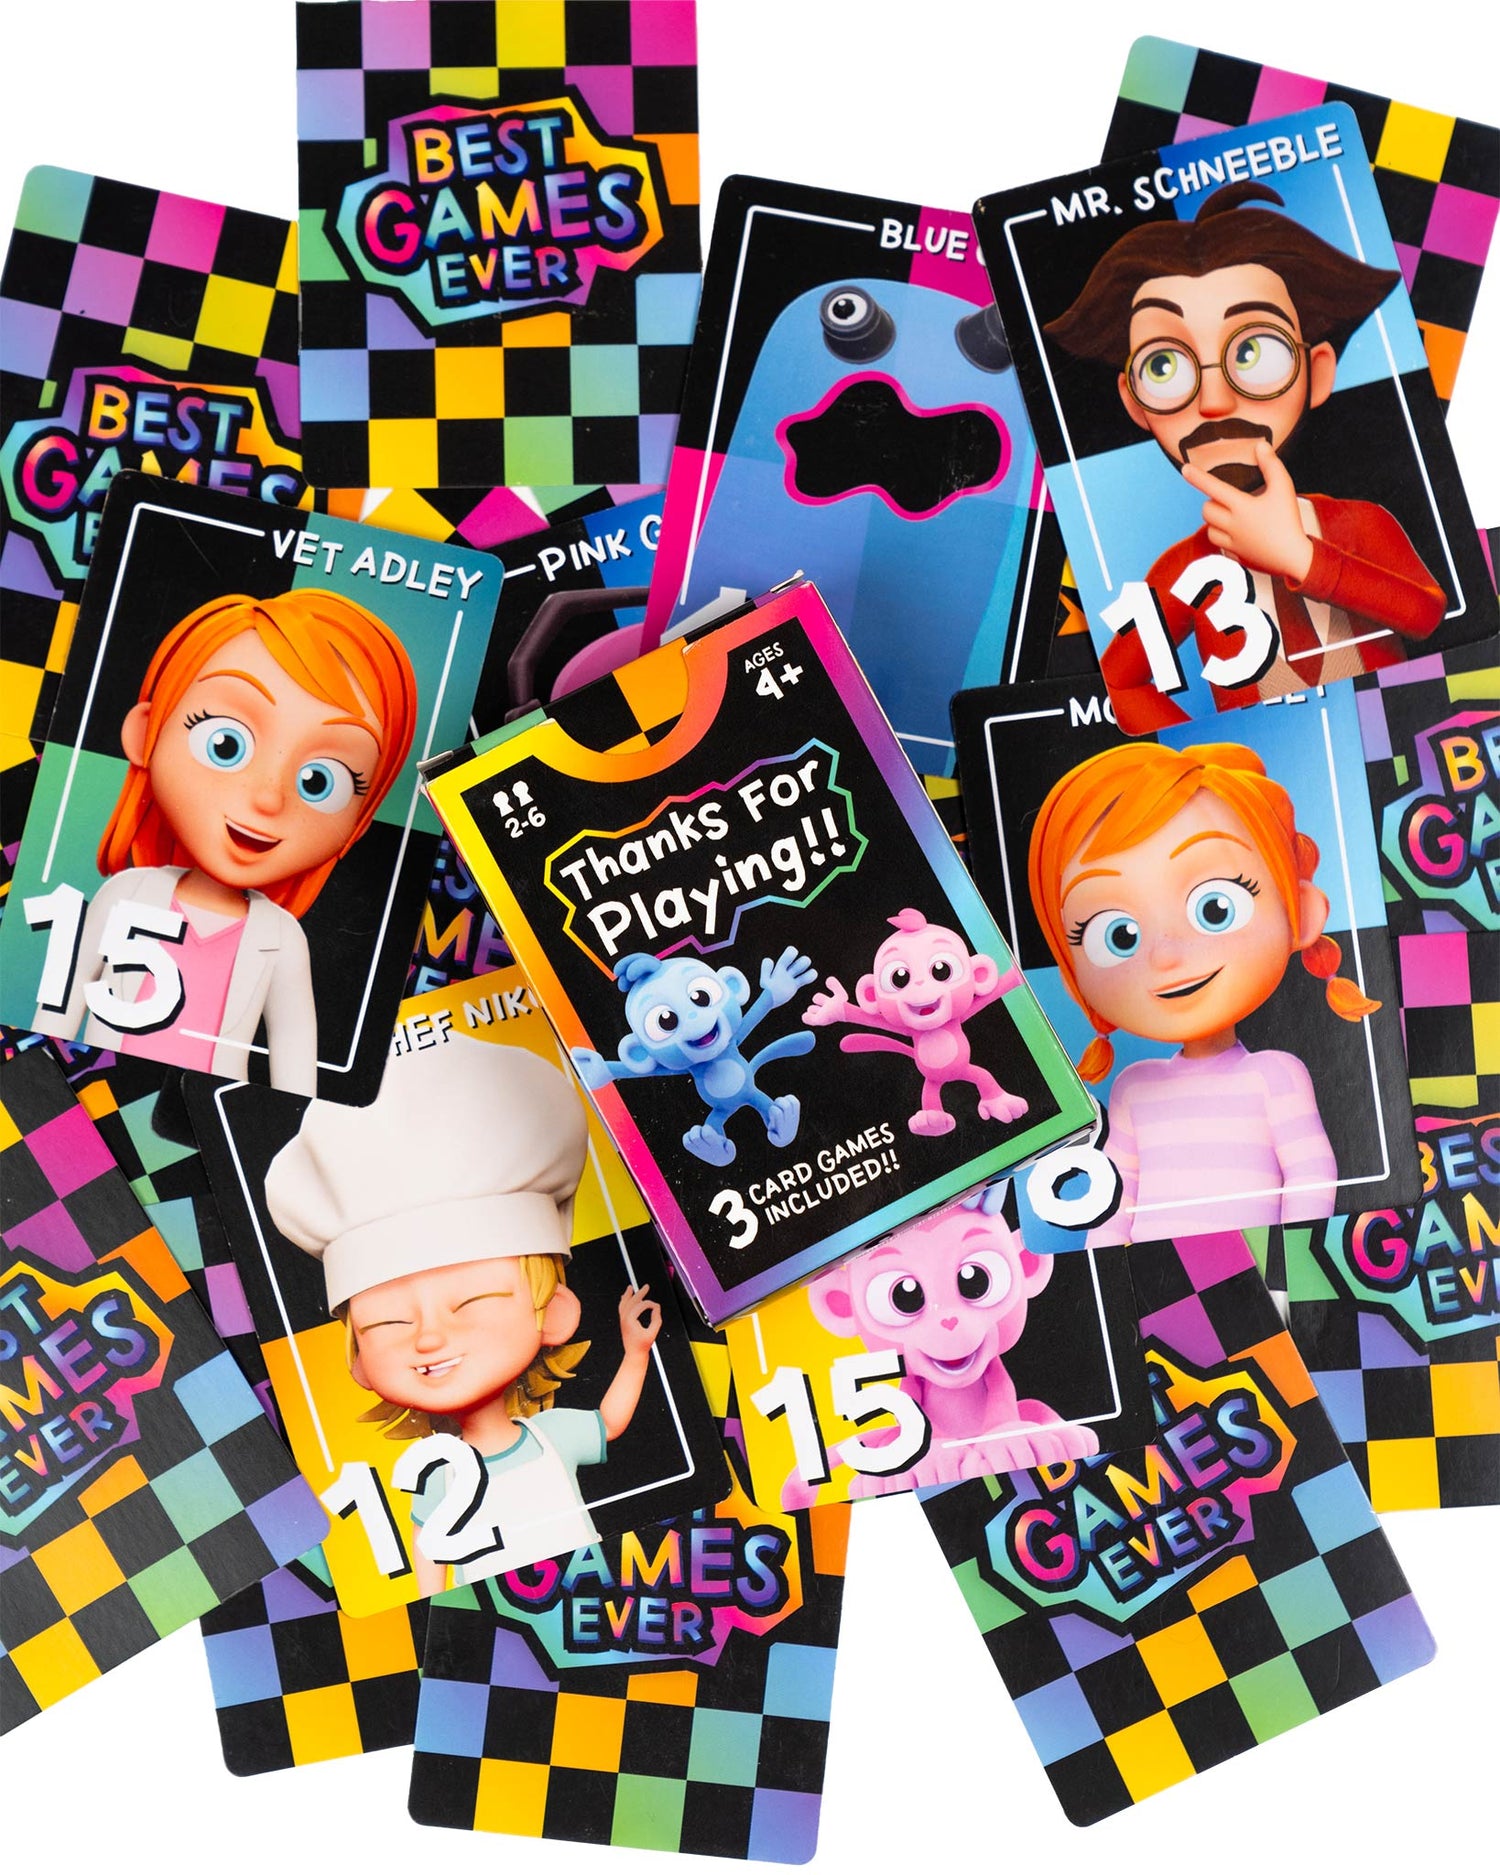 Best Games Ever: 3-in-1 CARD GAME